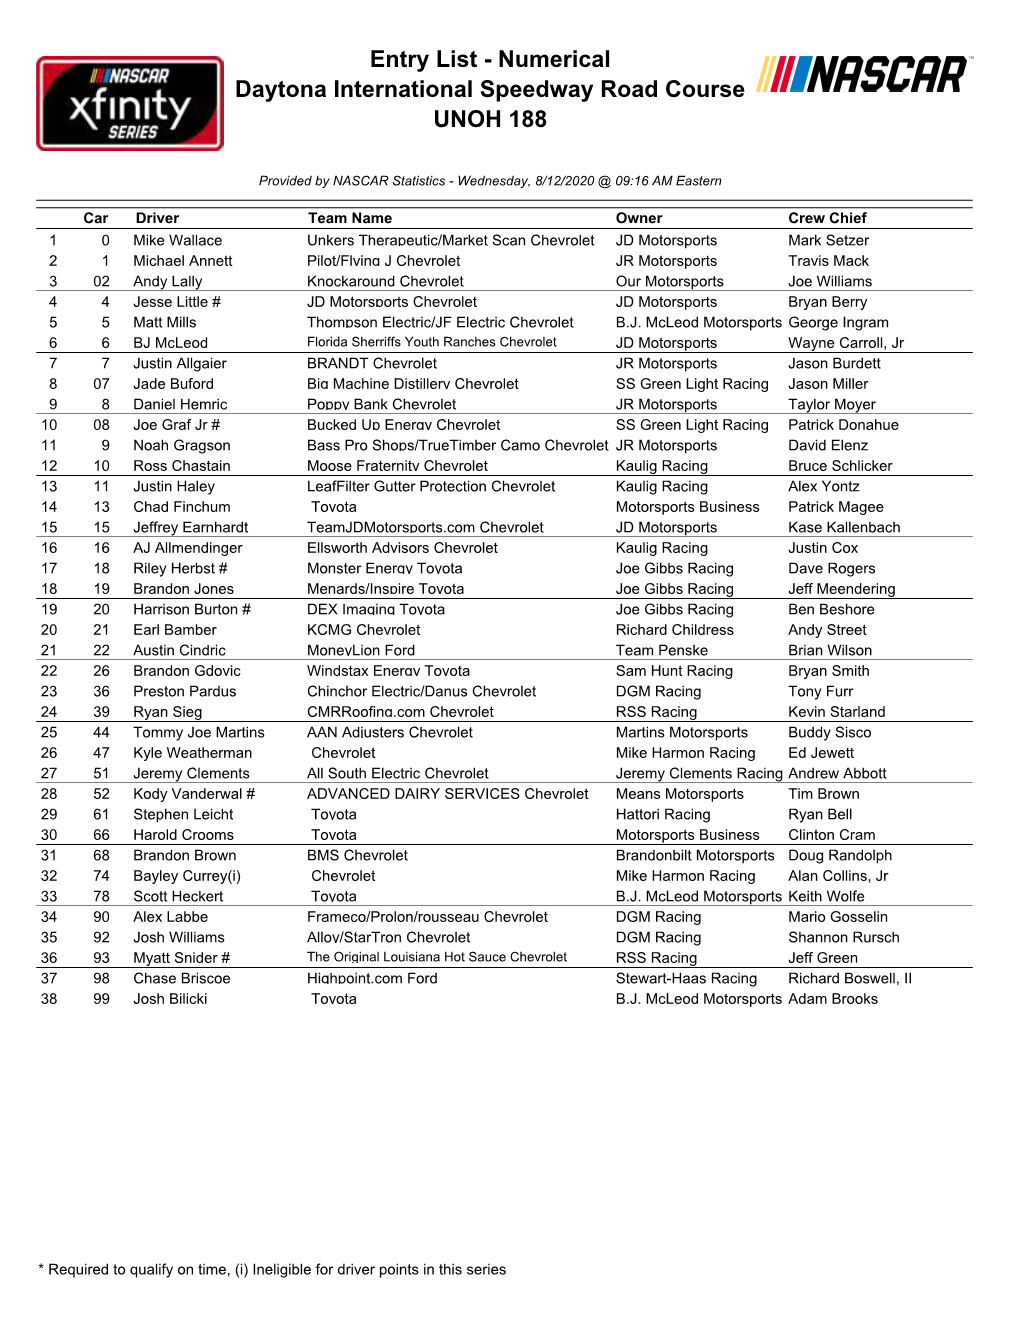 The Entry List for the Xfinity Race